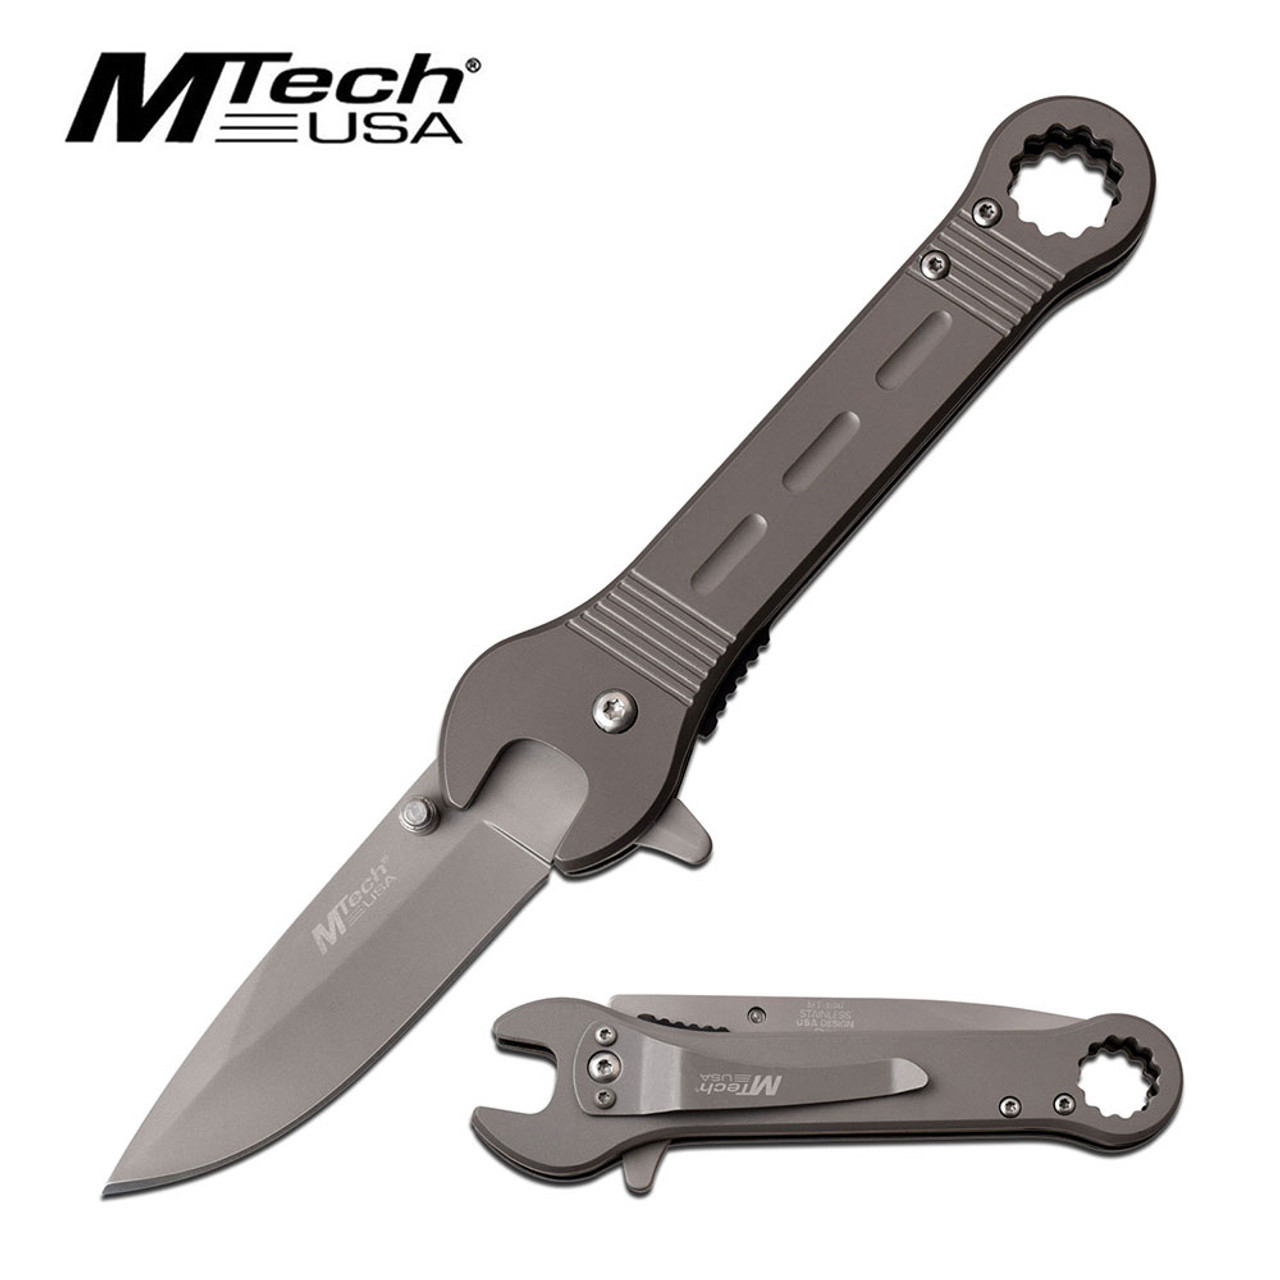 MTECH ASSISST SS WRENCH STYLE KNIFE, 5" CLSD